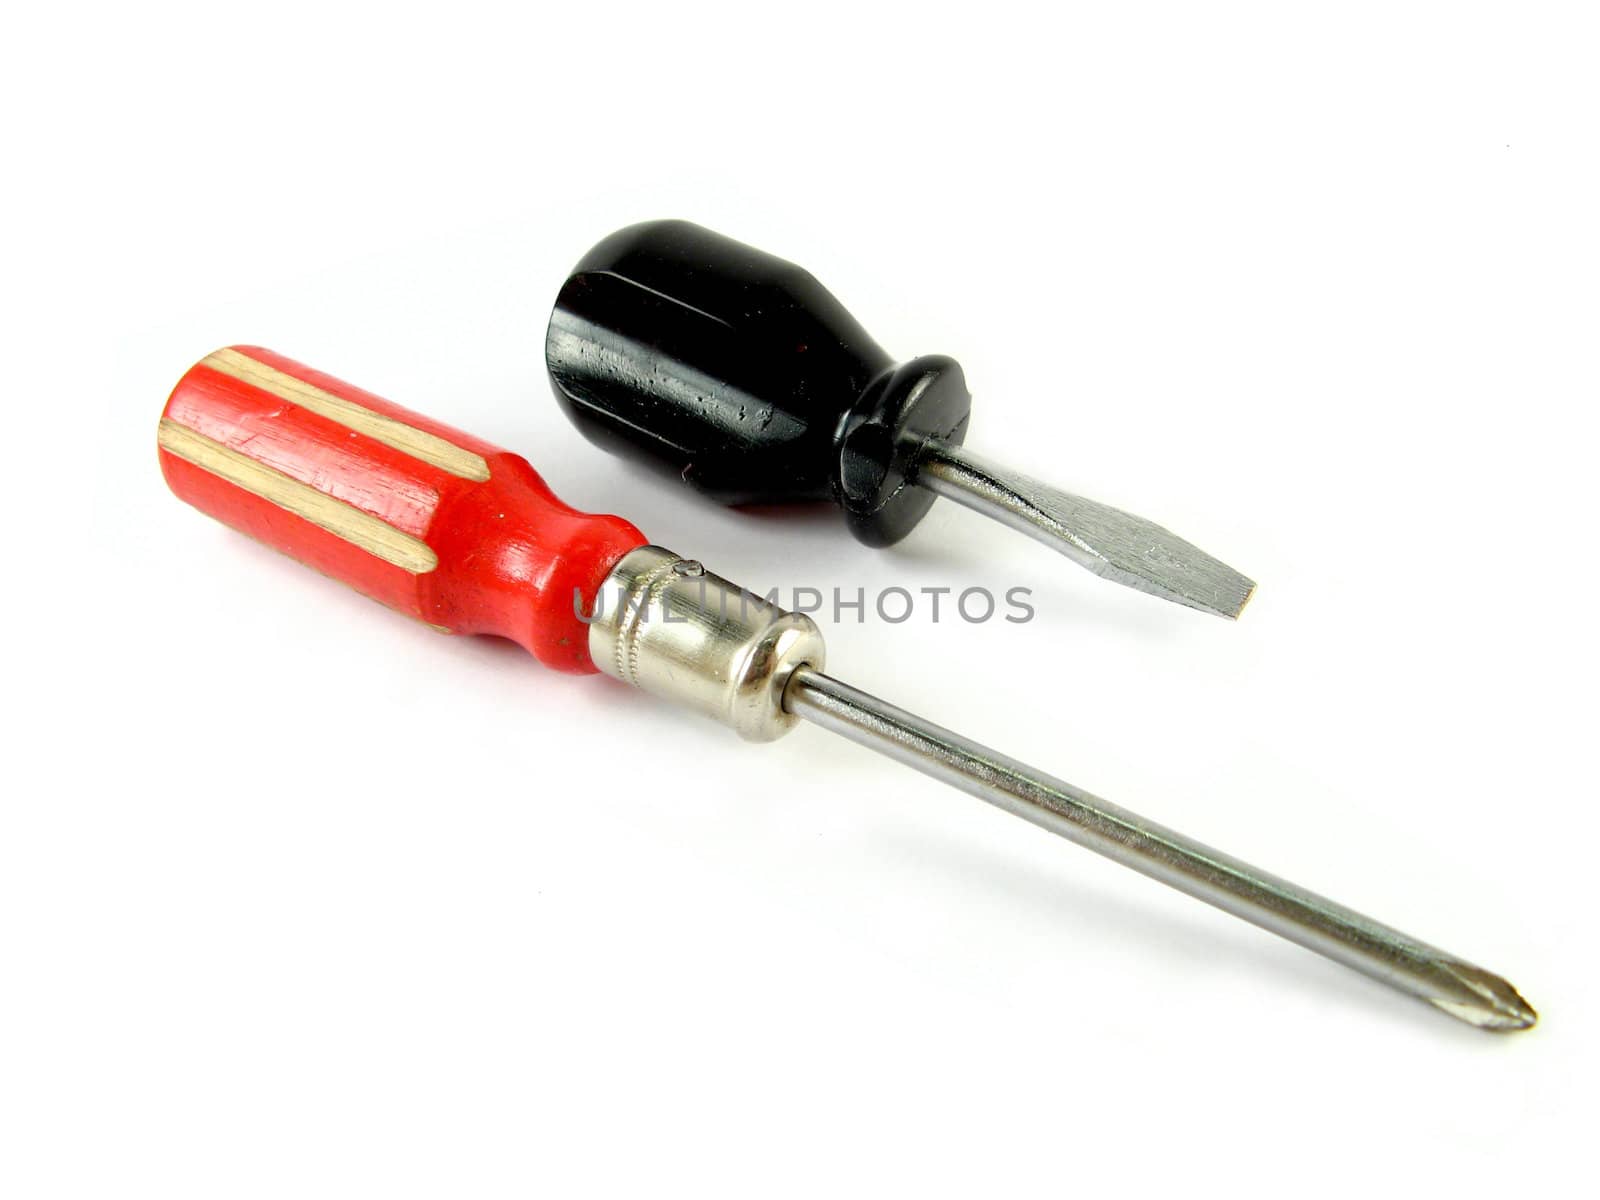 a photo of two screwdrivers over a white background